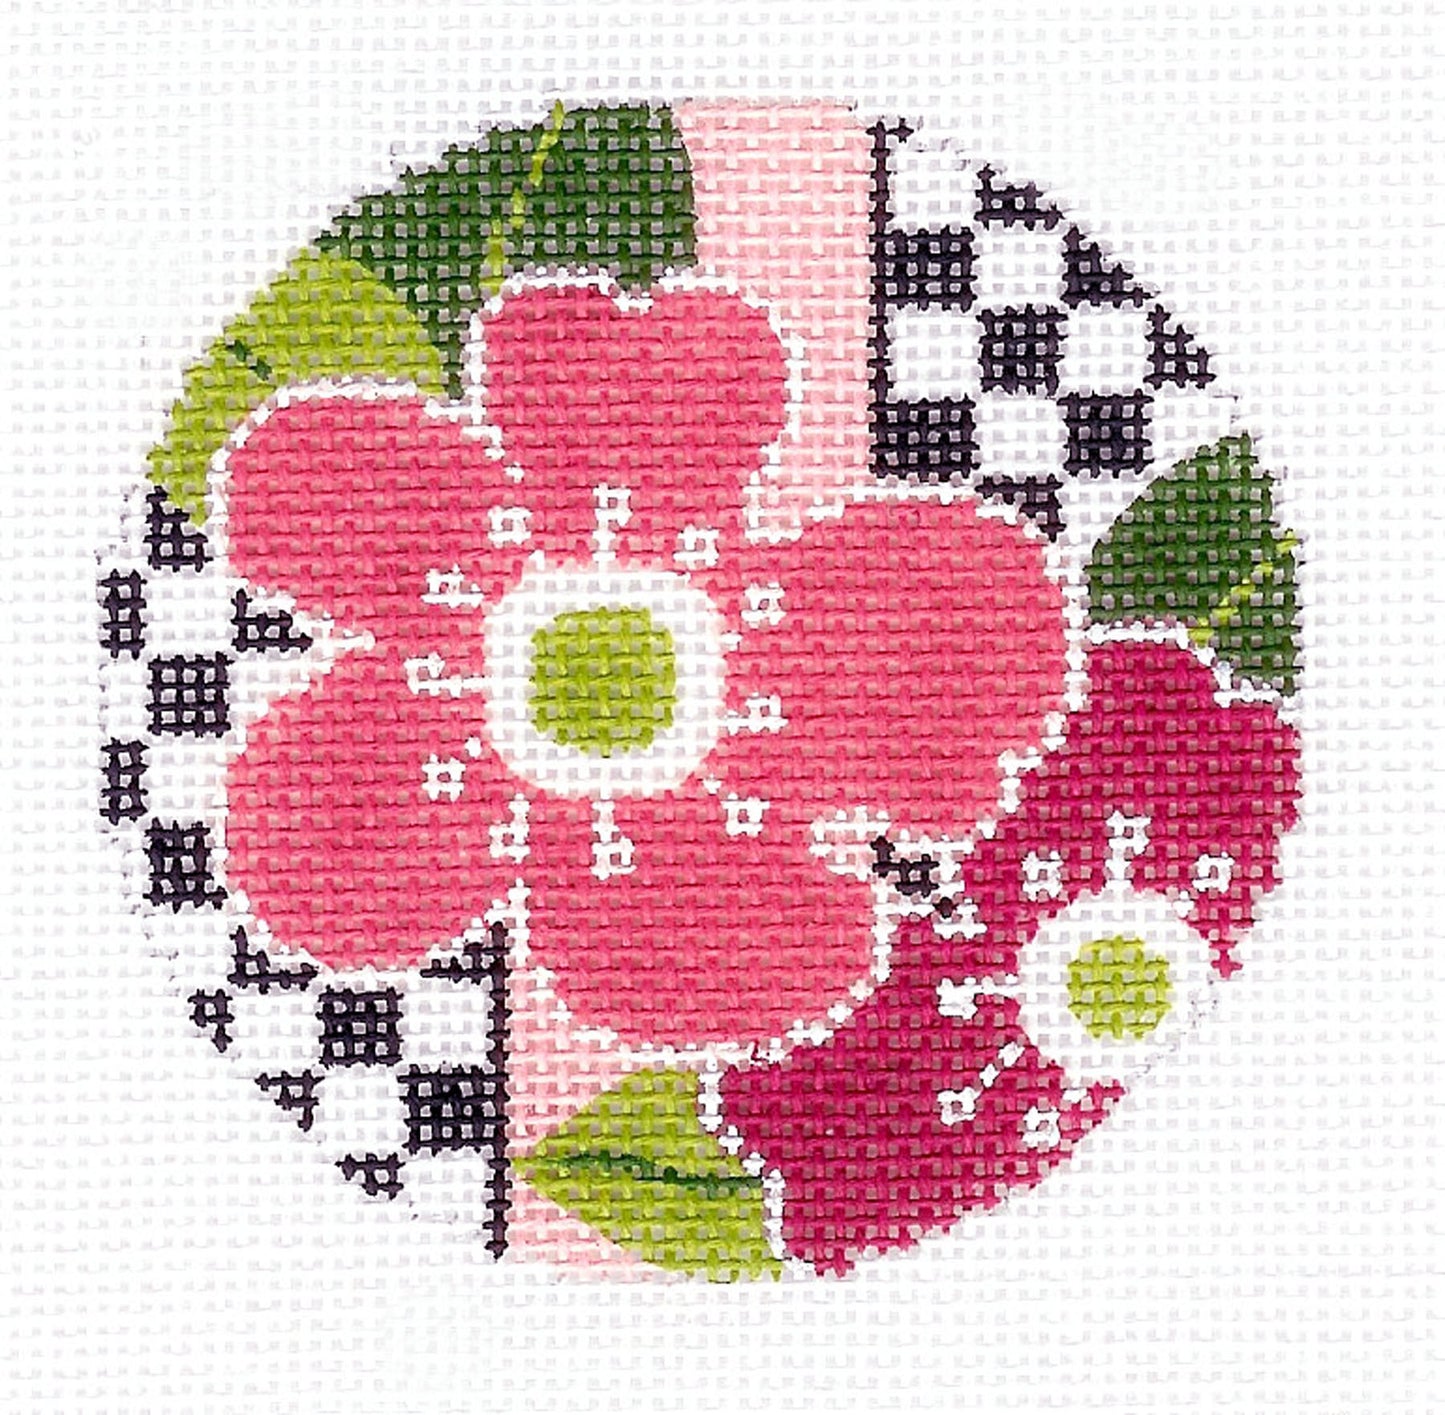 Round ~ Pink Floral Design with Black/White Checks 3" Rd. 18 mesh handpainted Needlepoint Canvas